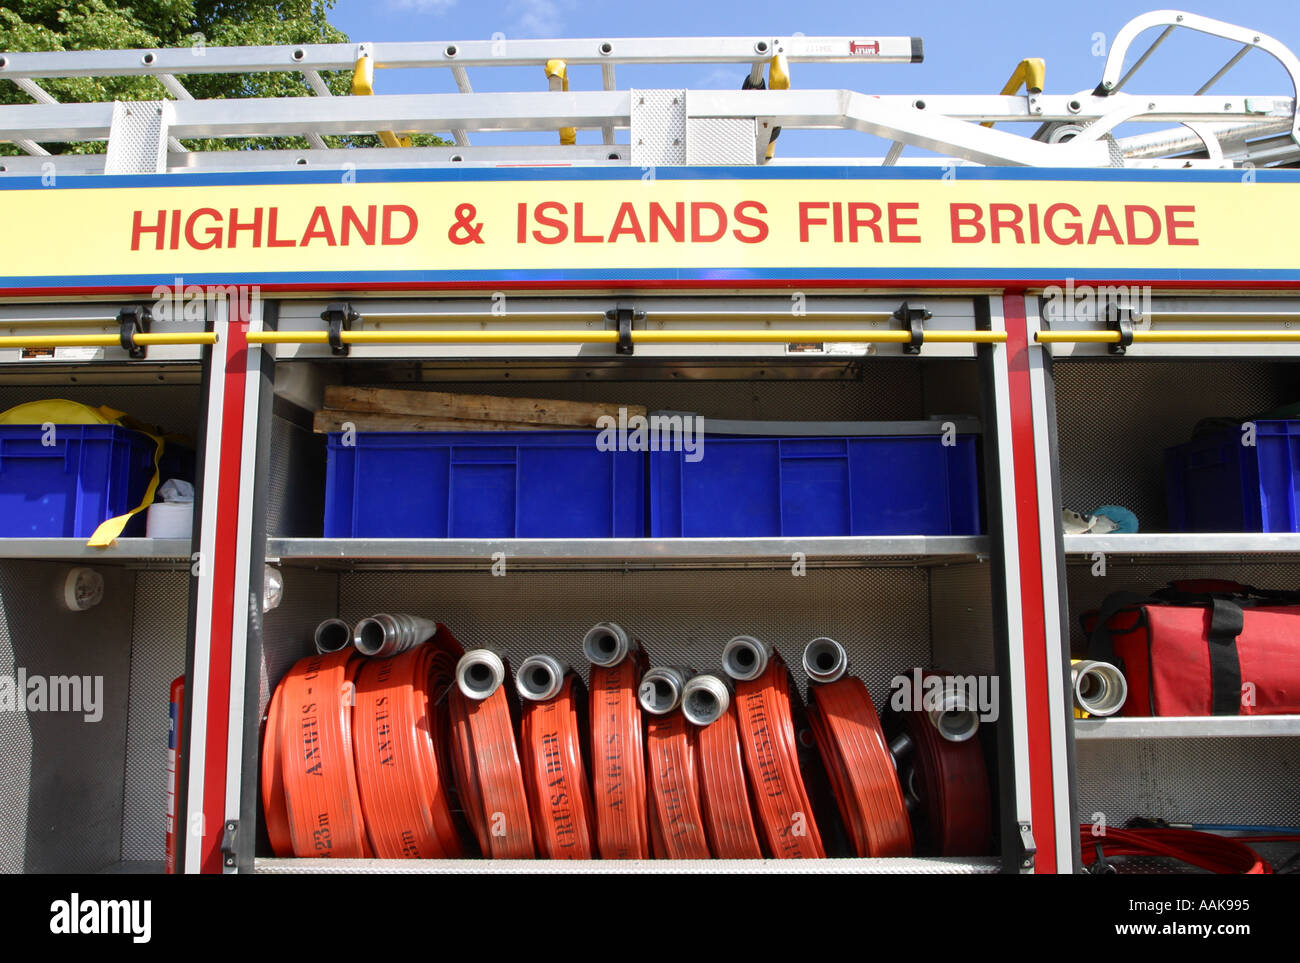 Fire engine emergency equipment water hoses and ladders Stock Photo